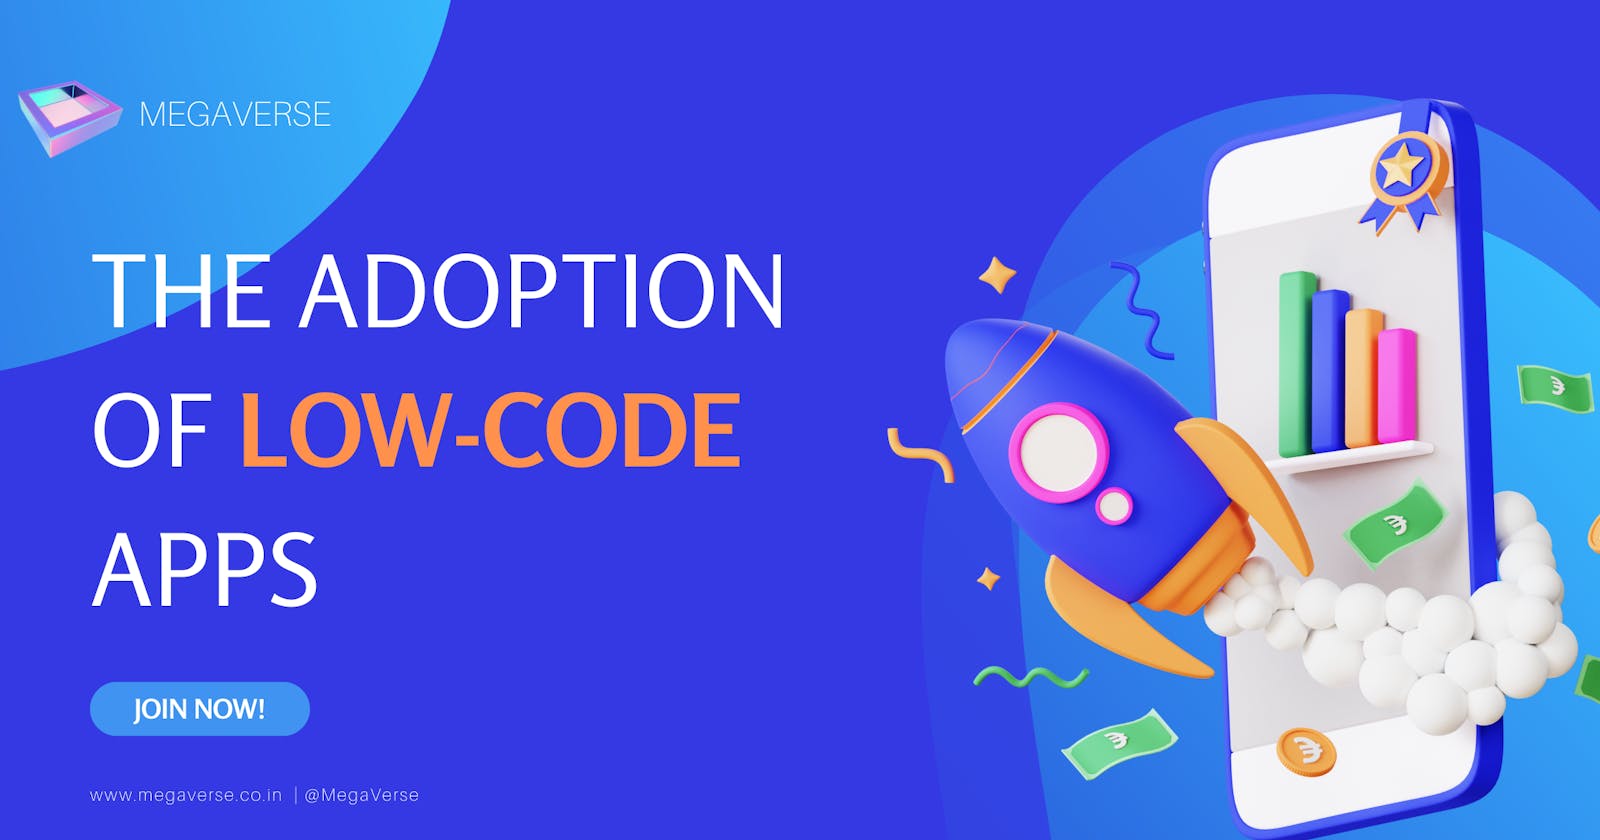 The adoption of low-code applications